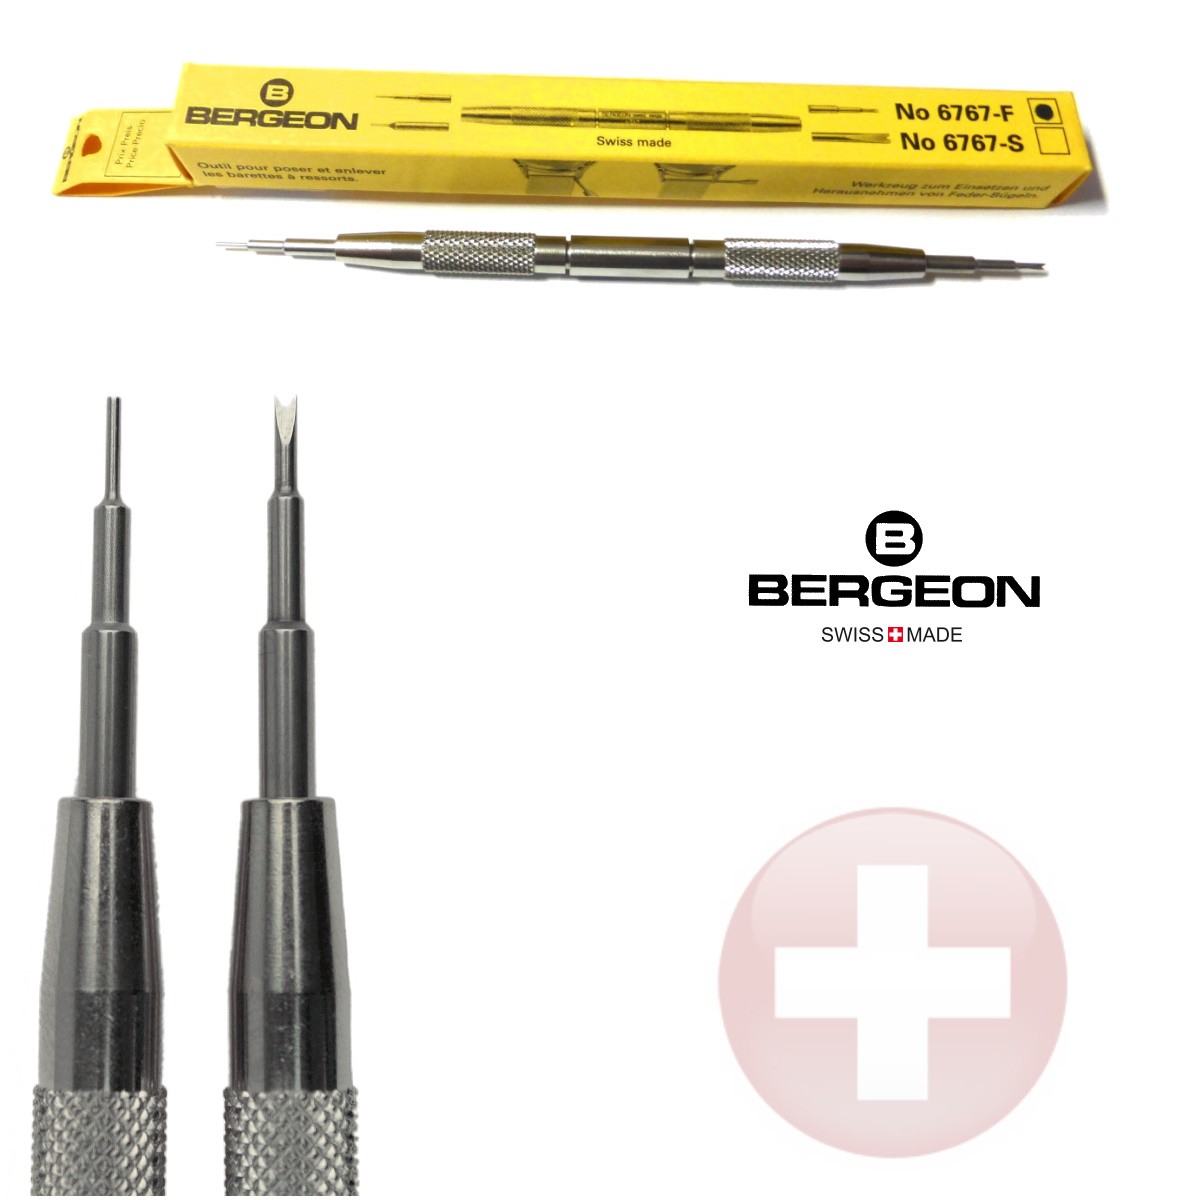 Bergeon spring bar tool 6767-F swiss made perfect for professional  watchmaker